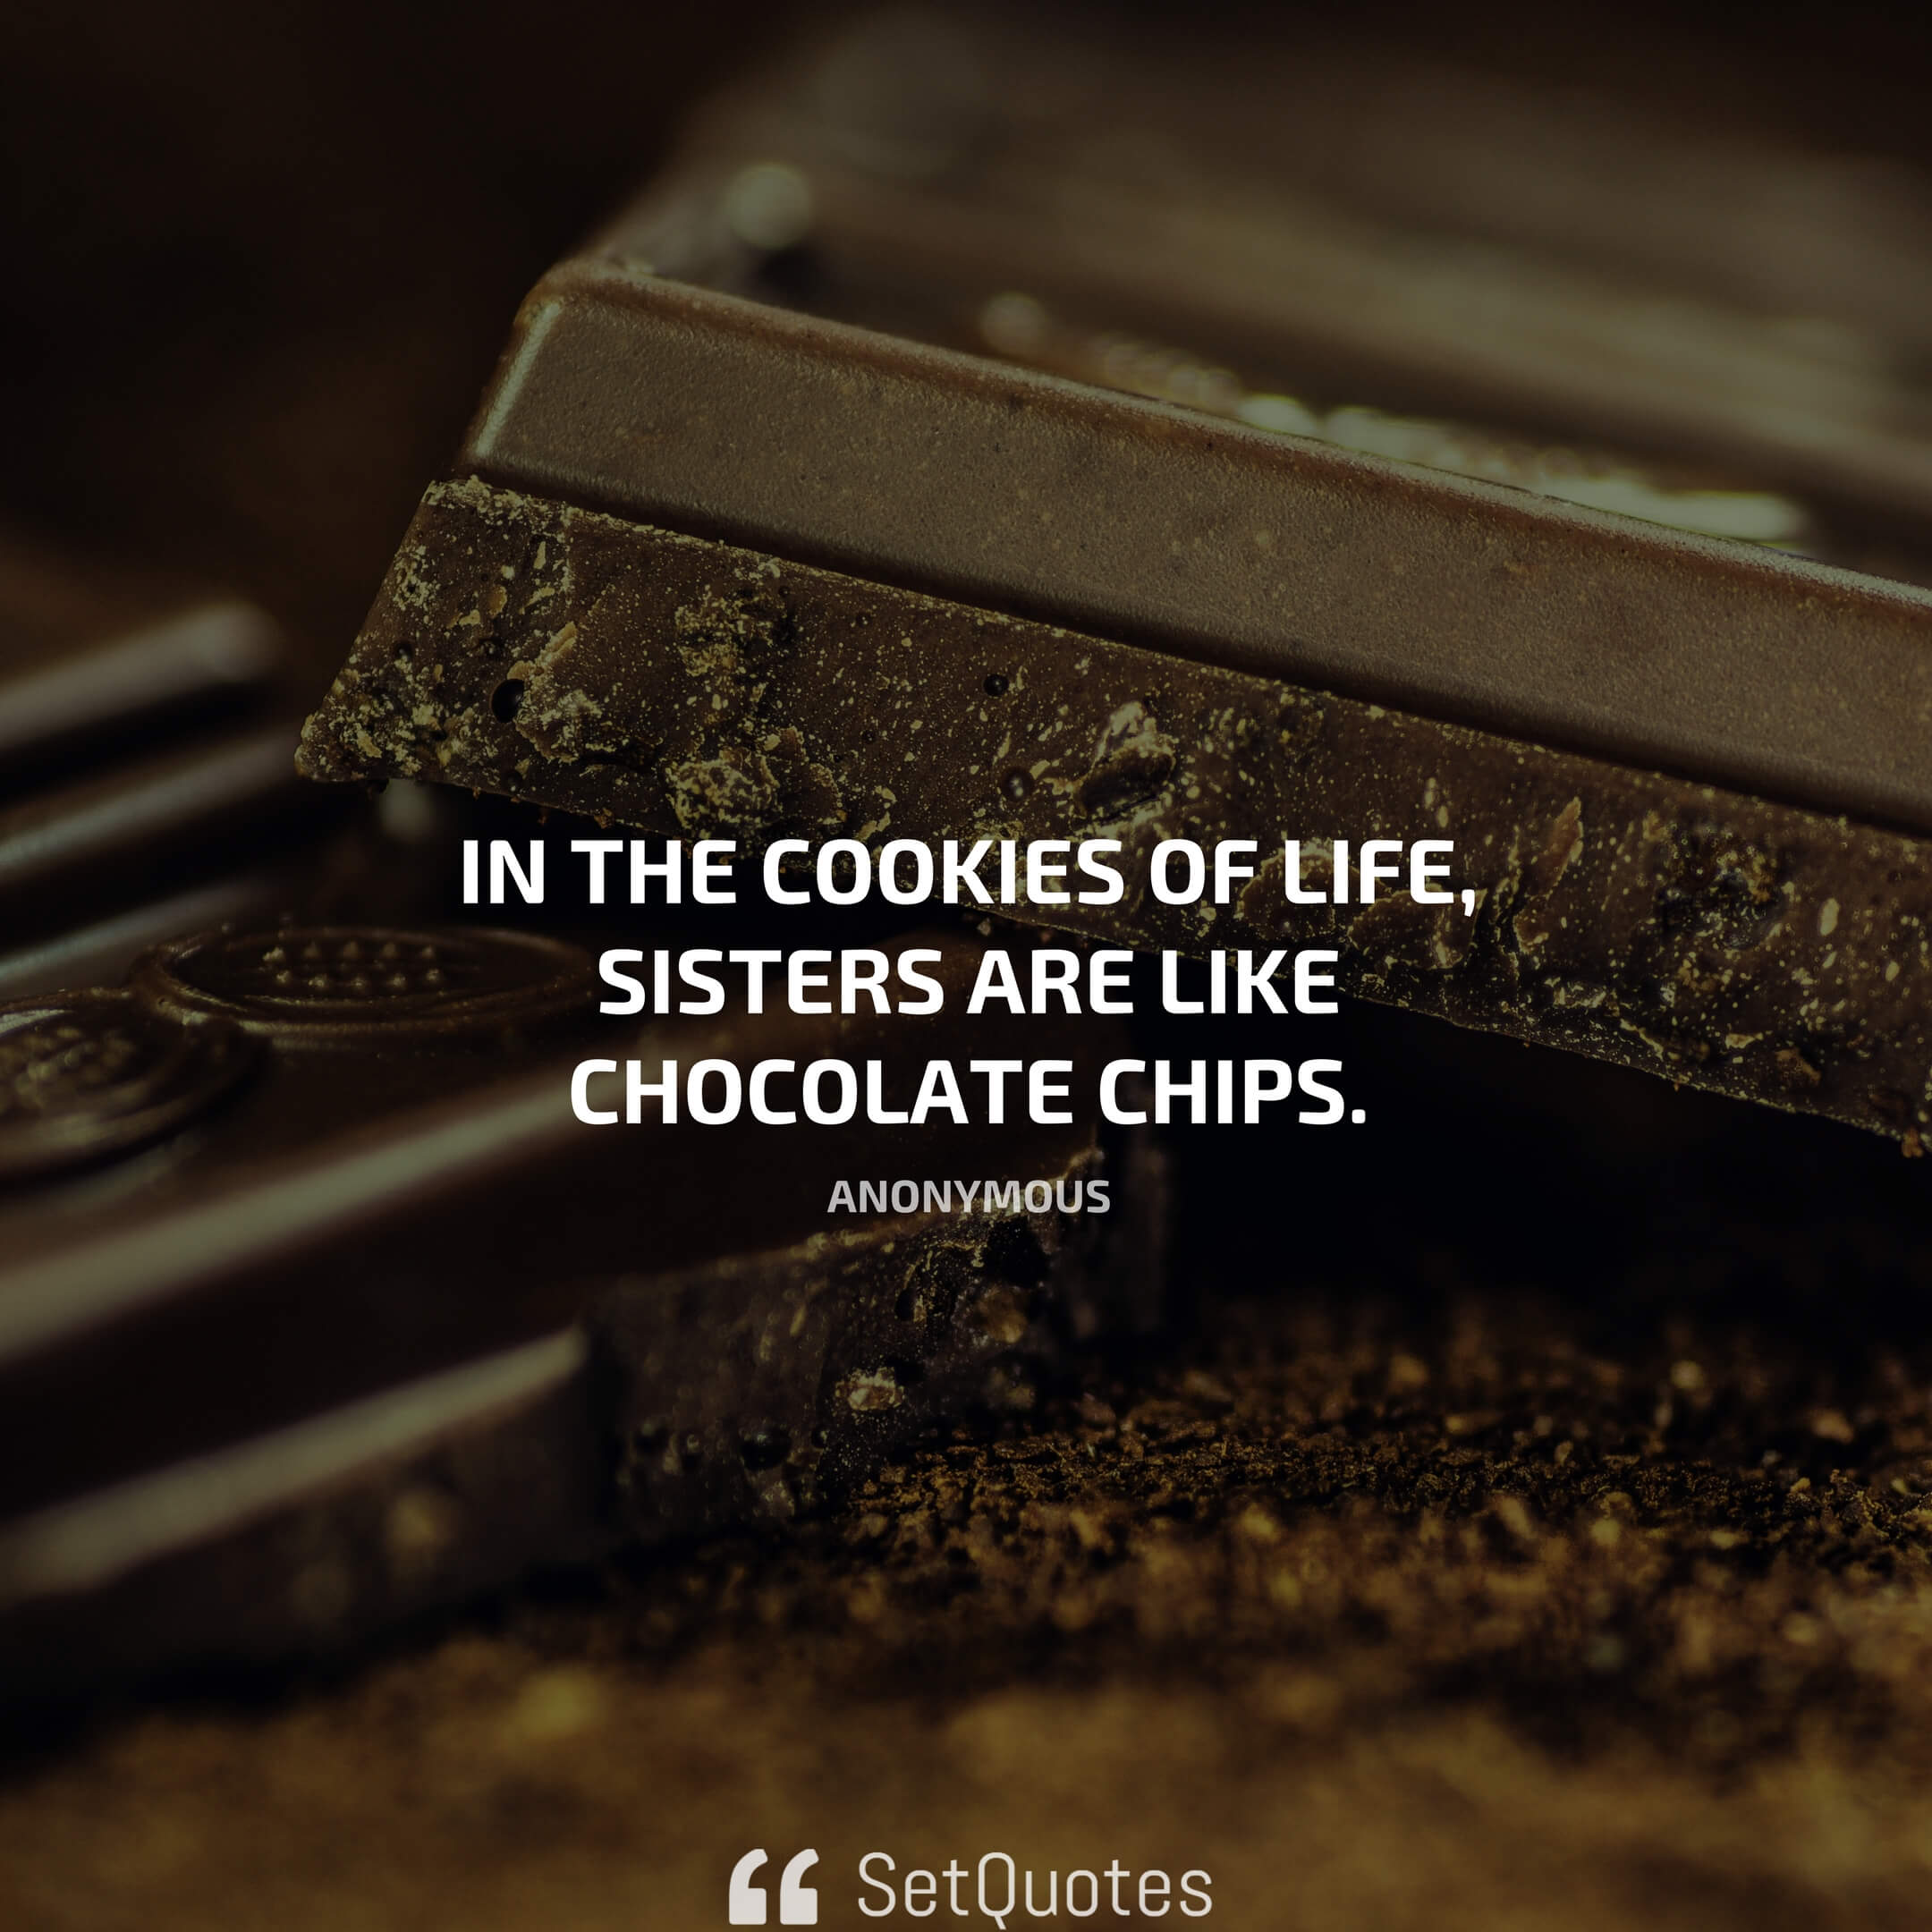 “In the cookies of life, sisters are like chocolate chips”